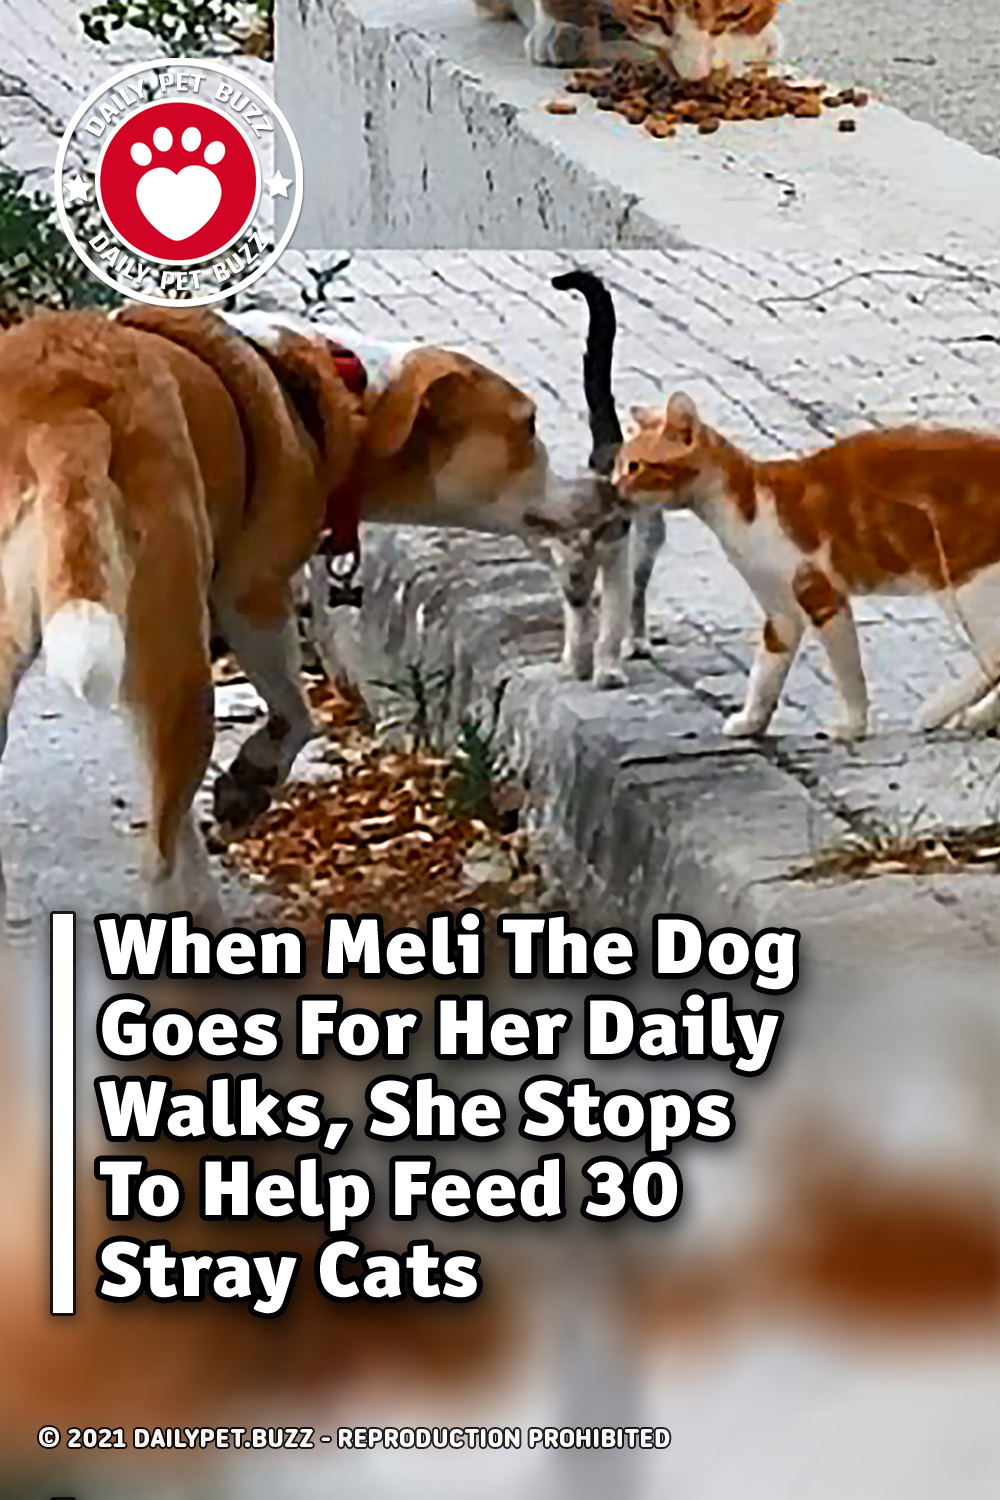 When Meli The Dog Goes For Her Daily Walks, She Stops To Help Feed 30 Stray Cats